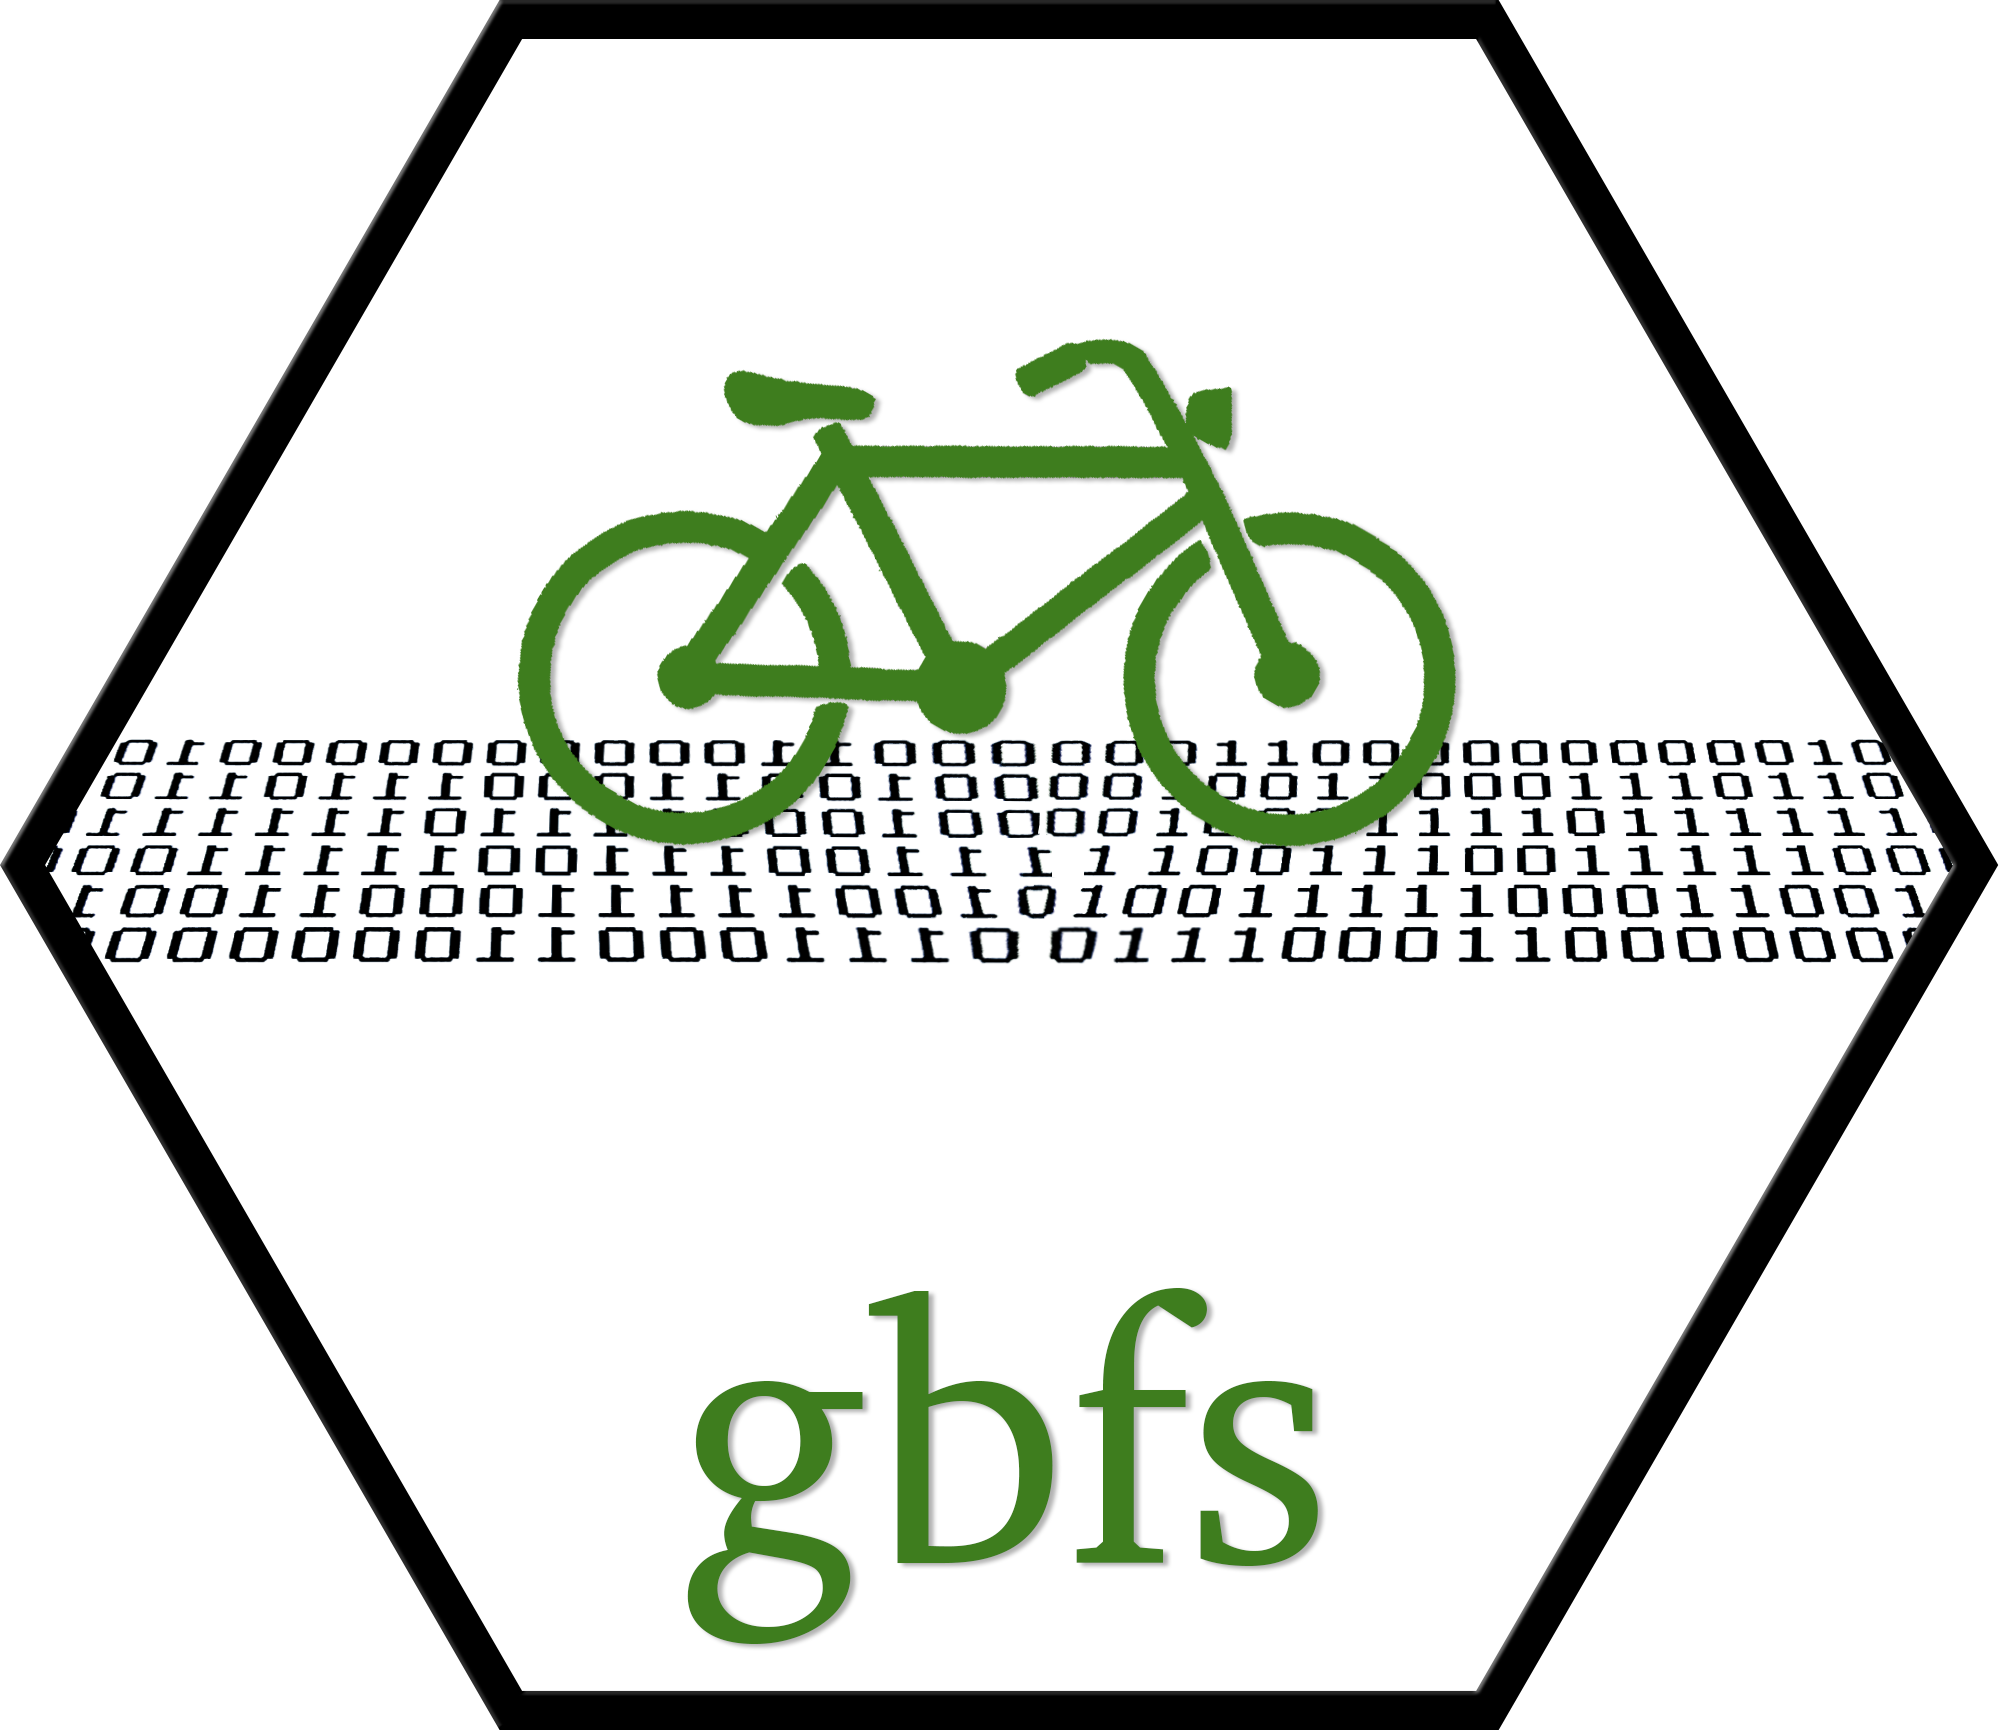 A hexagonal logo with a black border and white background showing a green bicycle icon.